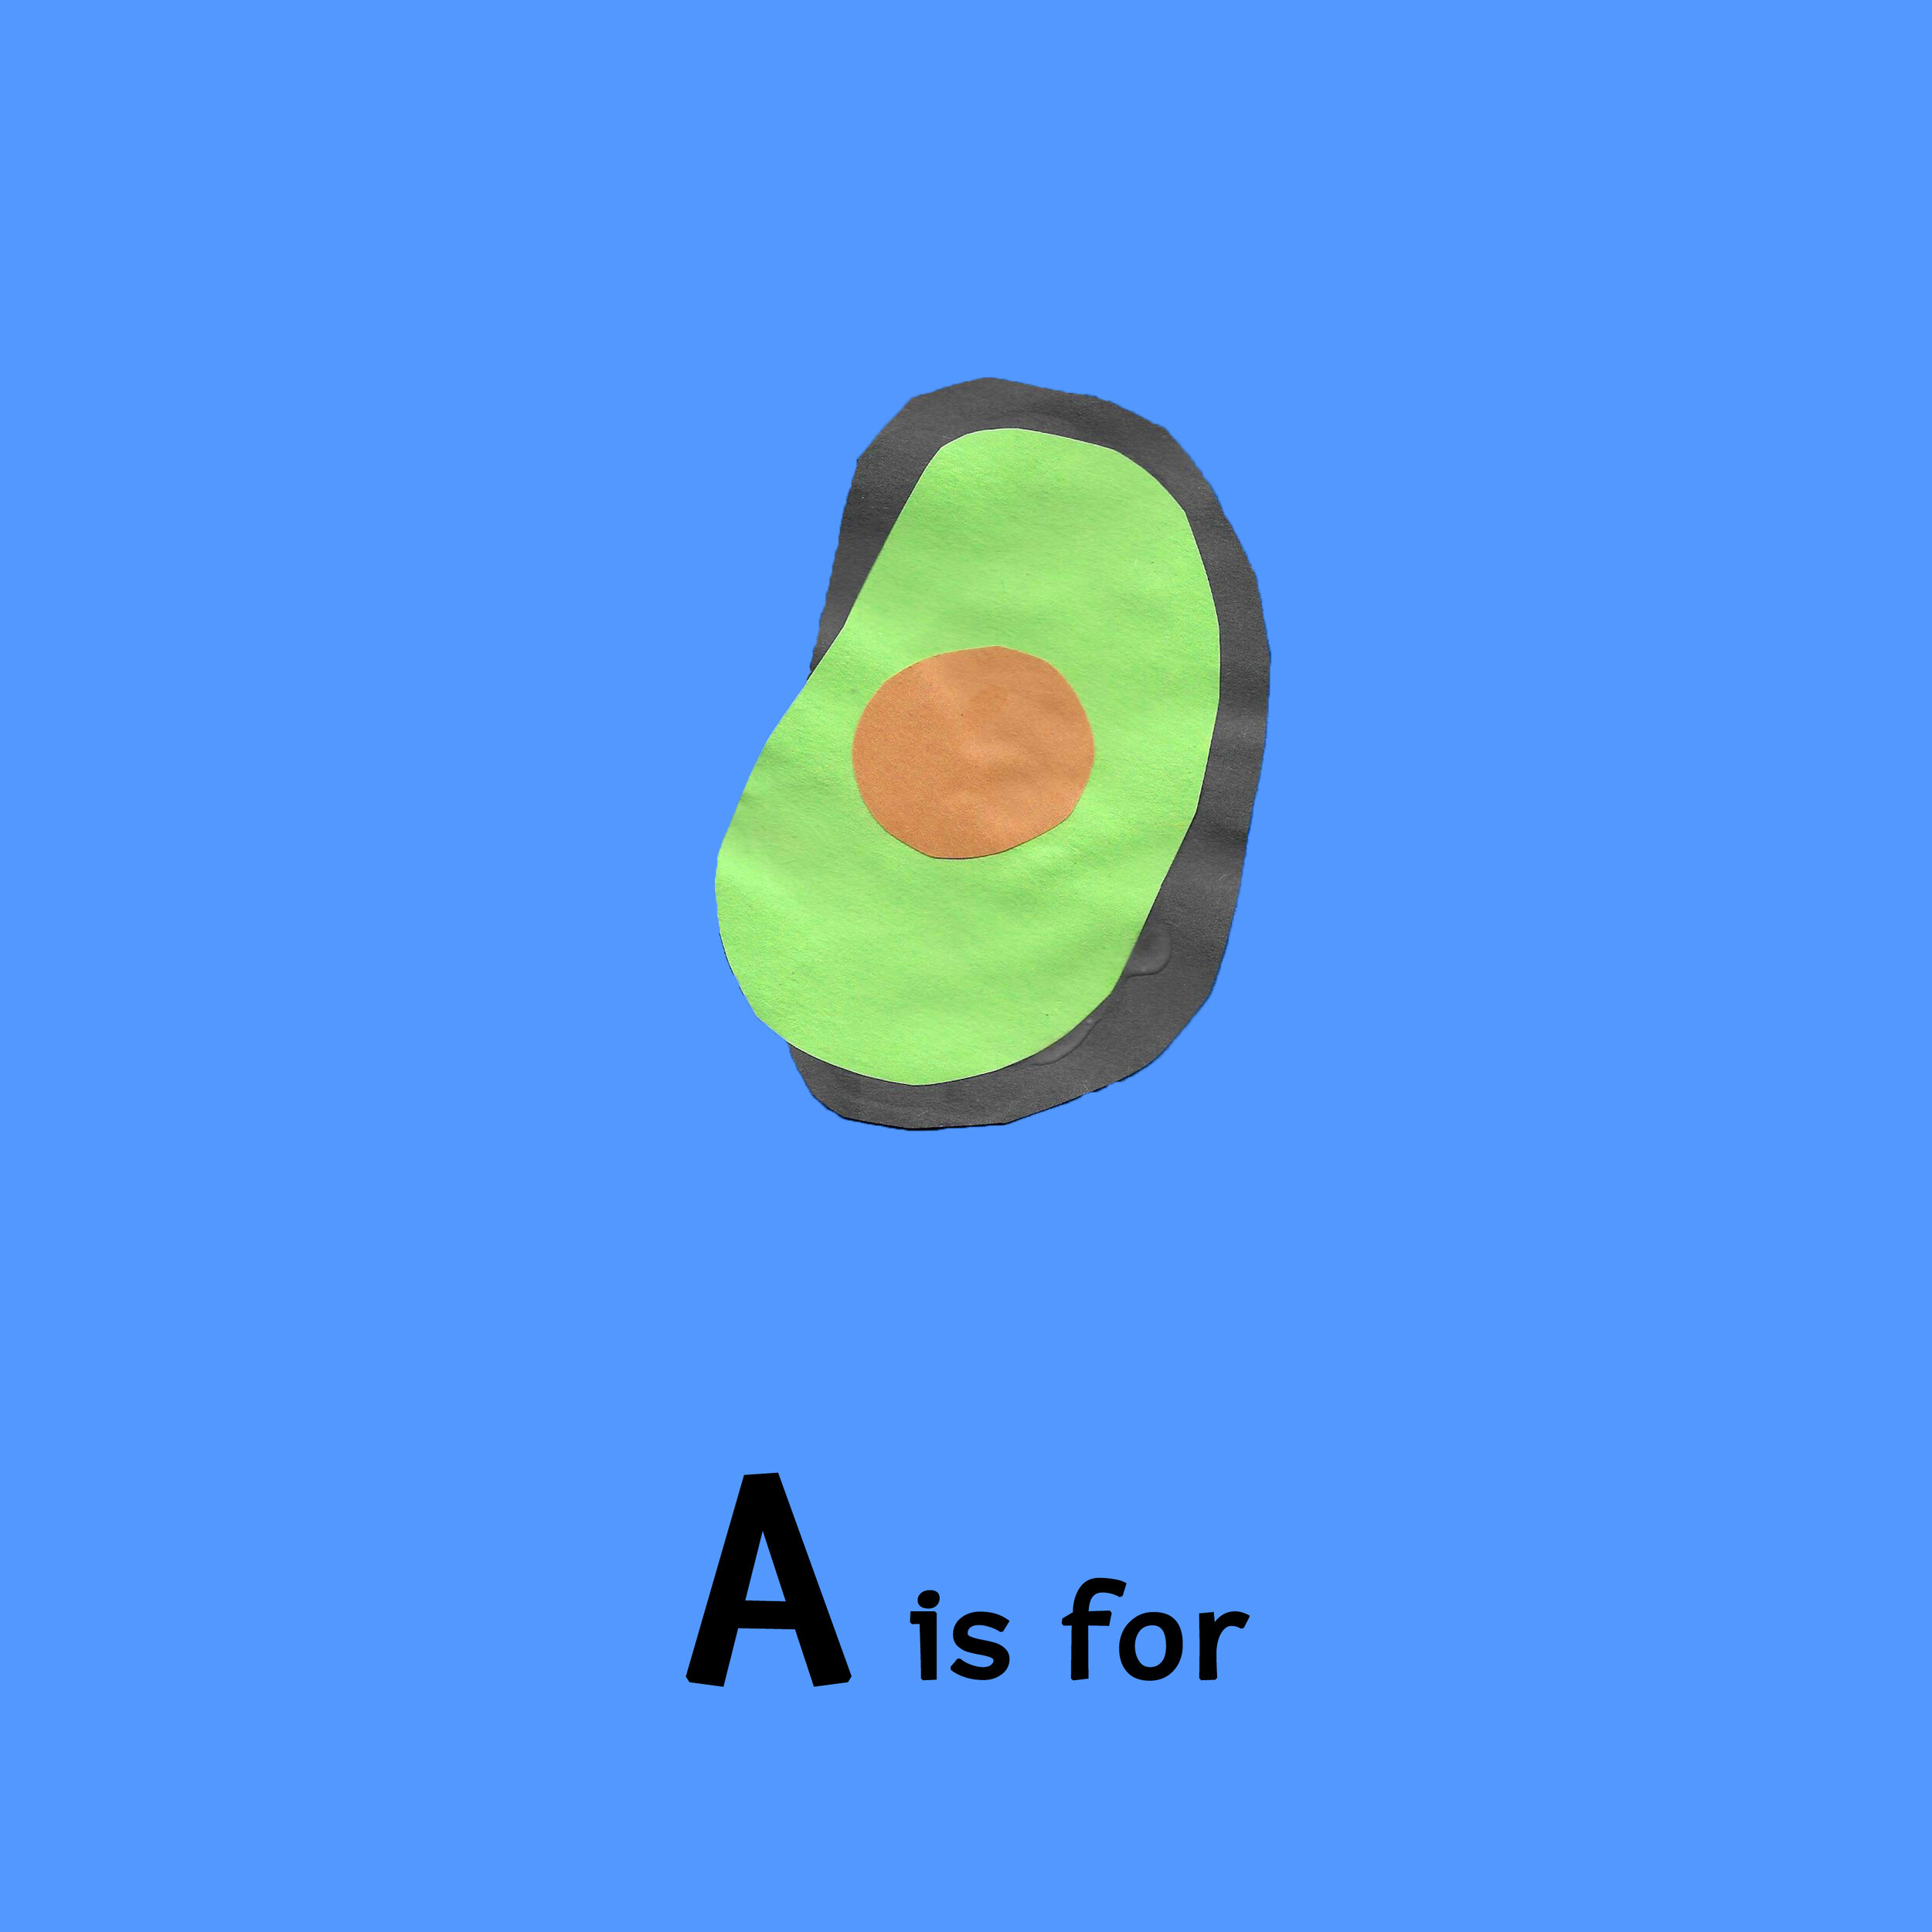 A is for.jpg